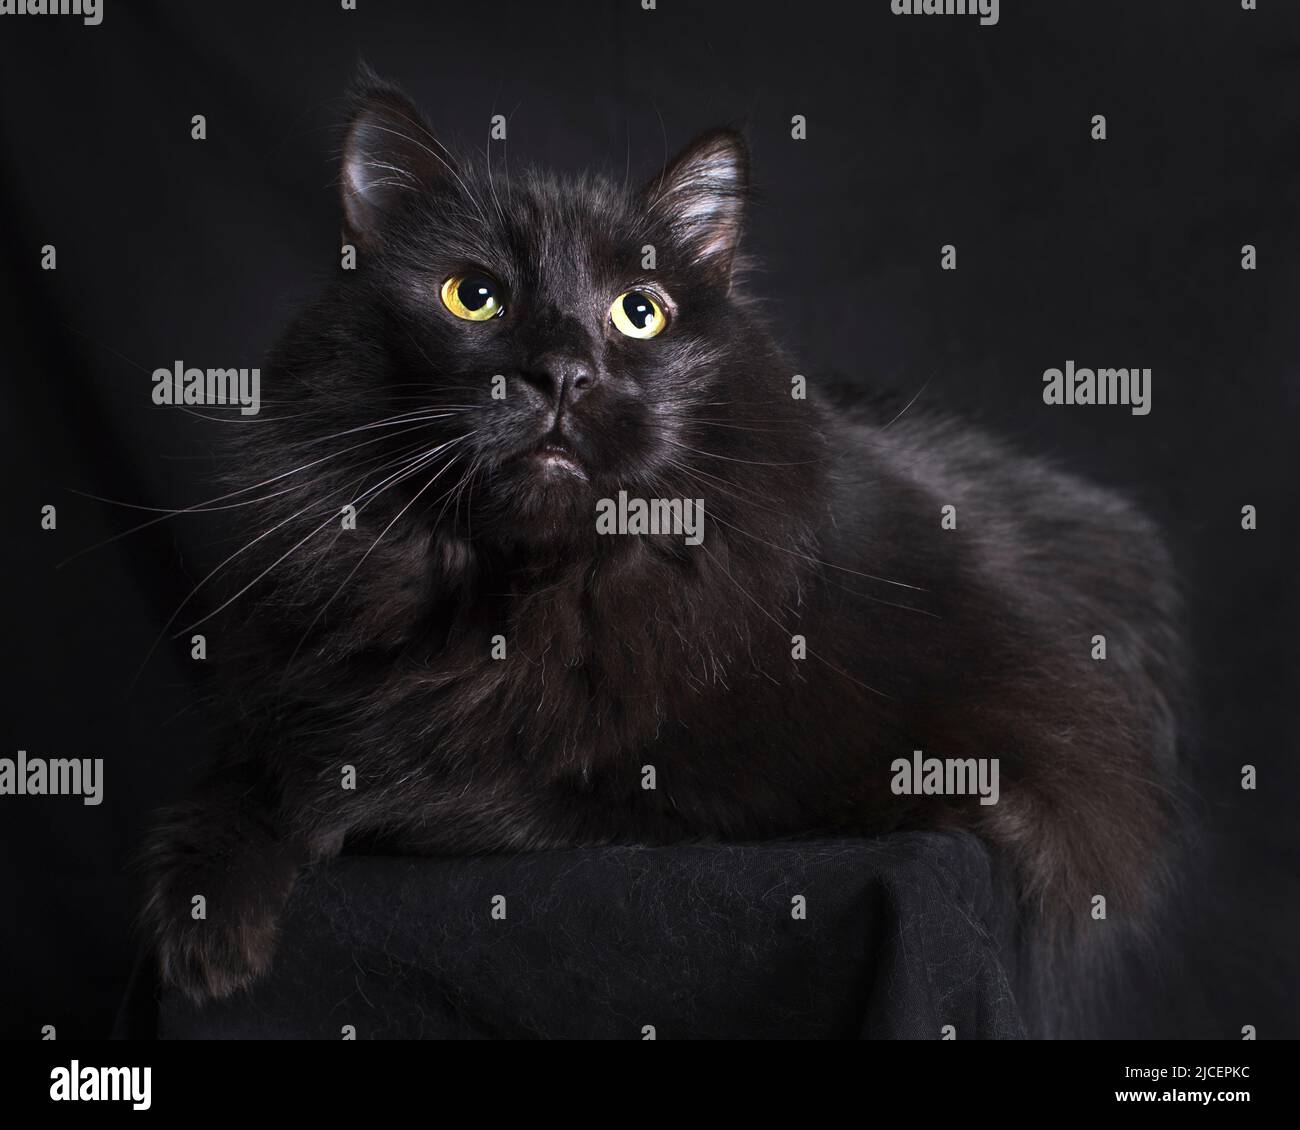 Pretty long haired black cat sitting and posing against a black background. Stock Photo